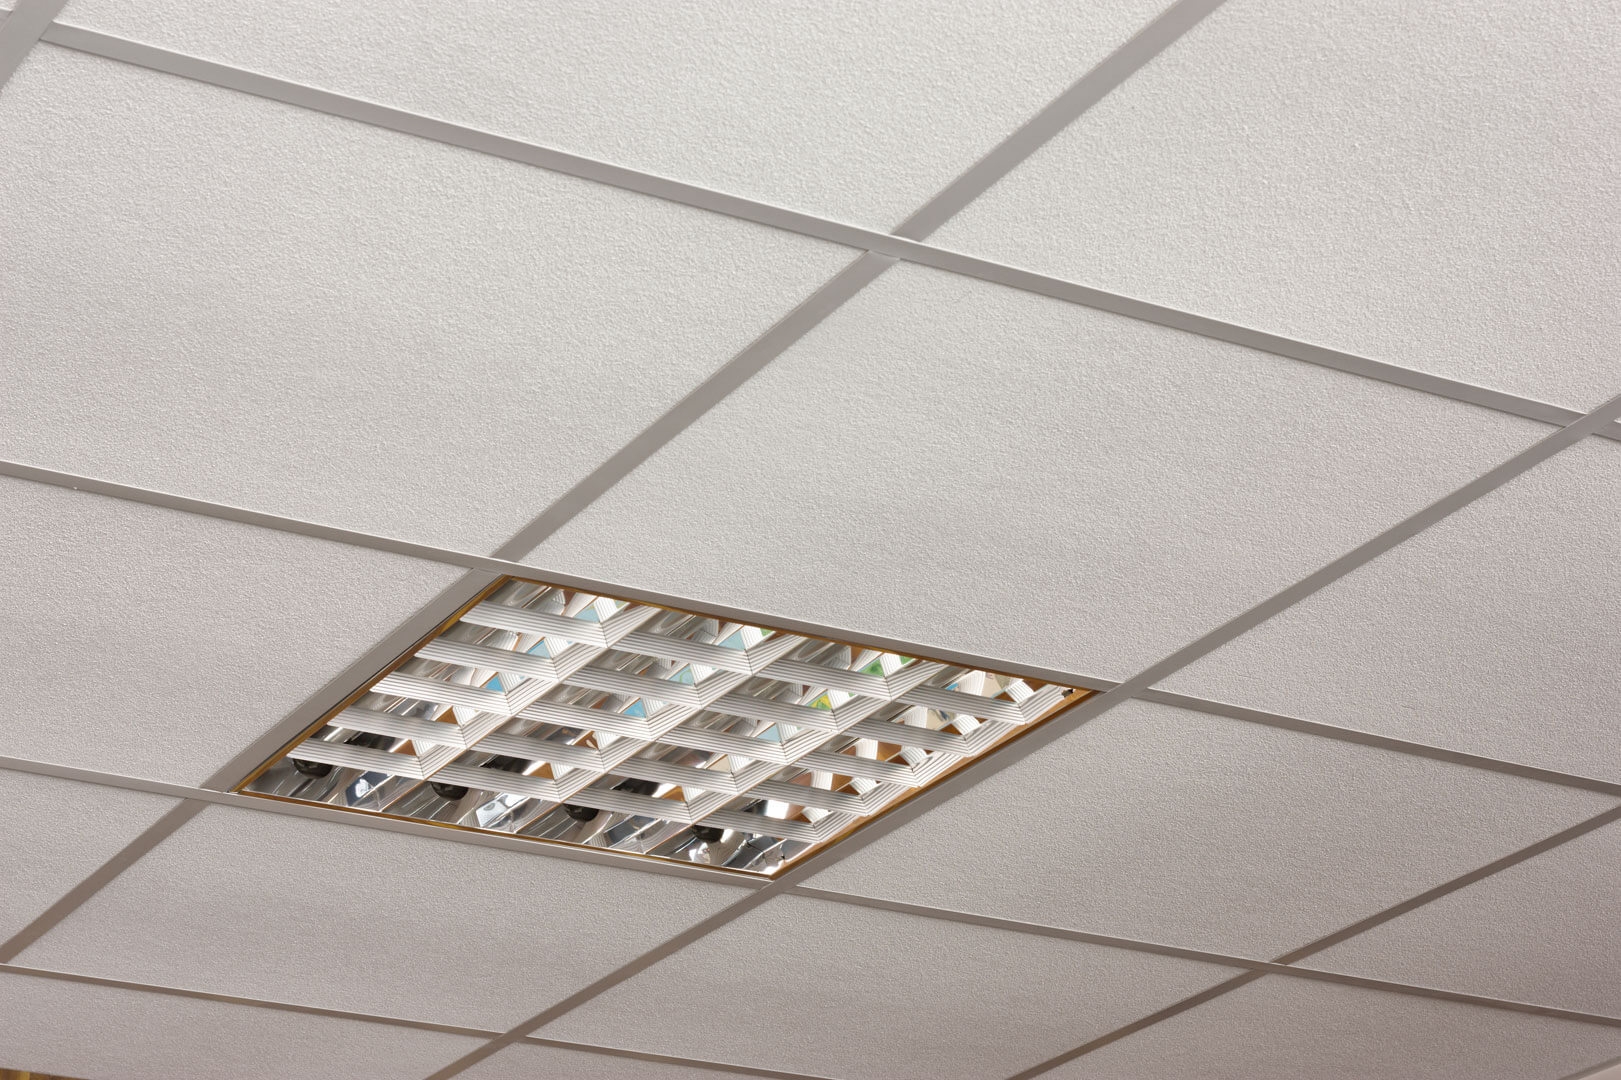 Armstrong Ceiling Tile Panels Armstrong Ceiling Tile Panels ceiling tiles lights accessories a leading uk supplier of 1621 X 1080